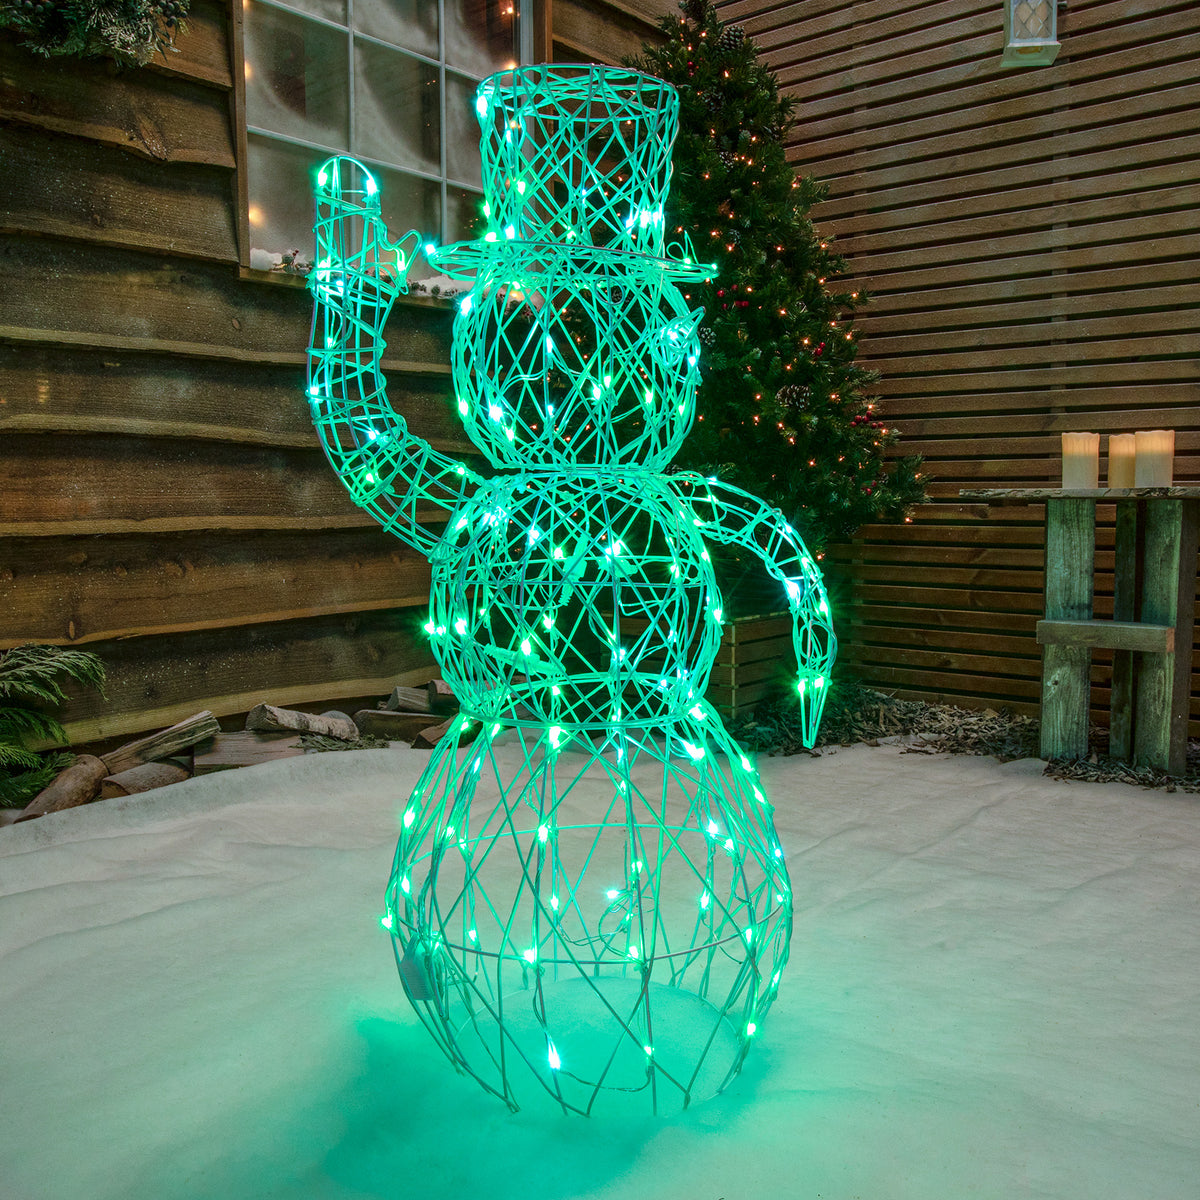 Christmas Snowman Lights - 1M Colour Changing White Wicker Snowmen with 120 LEDS